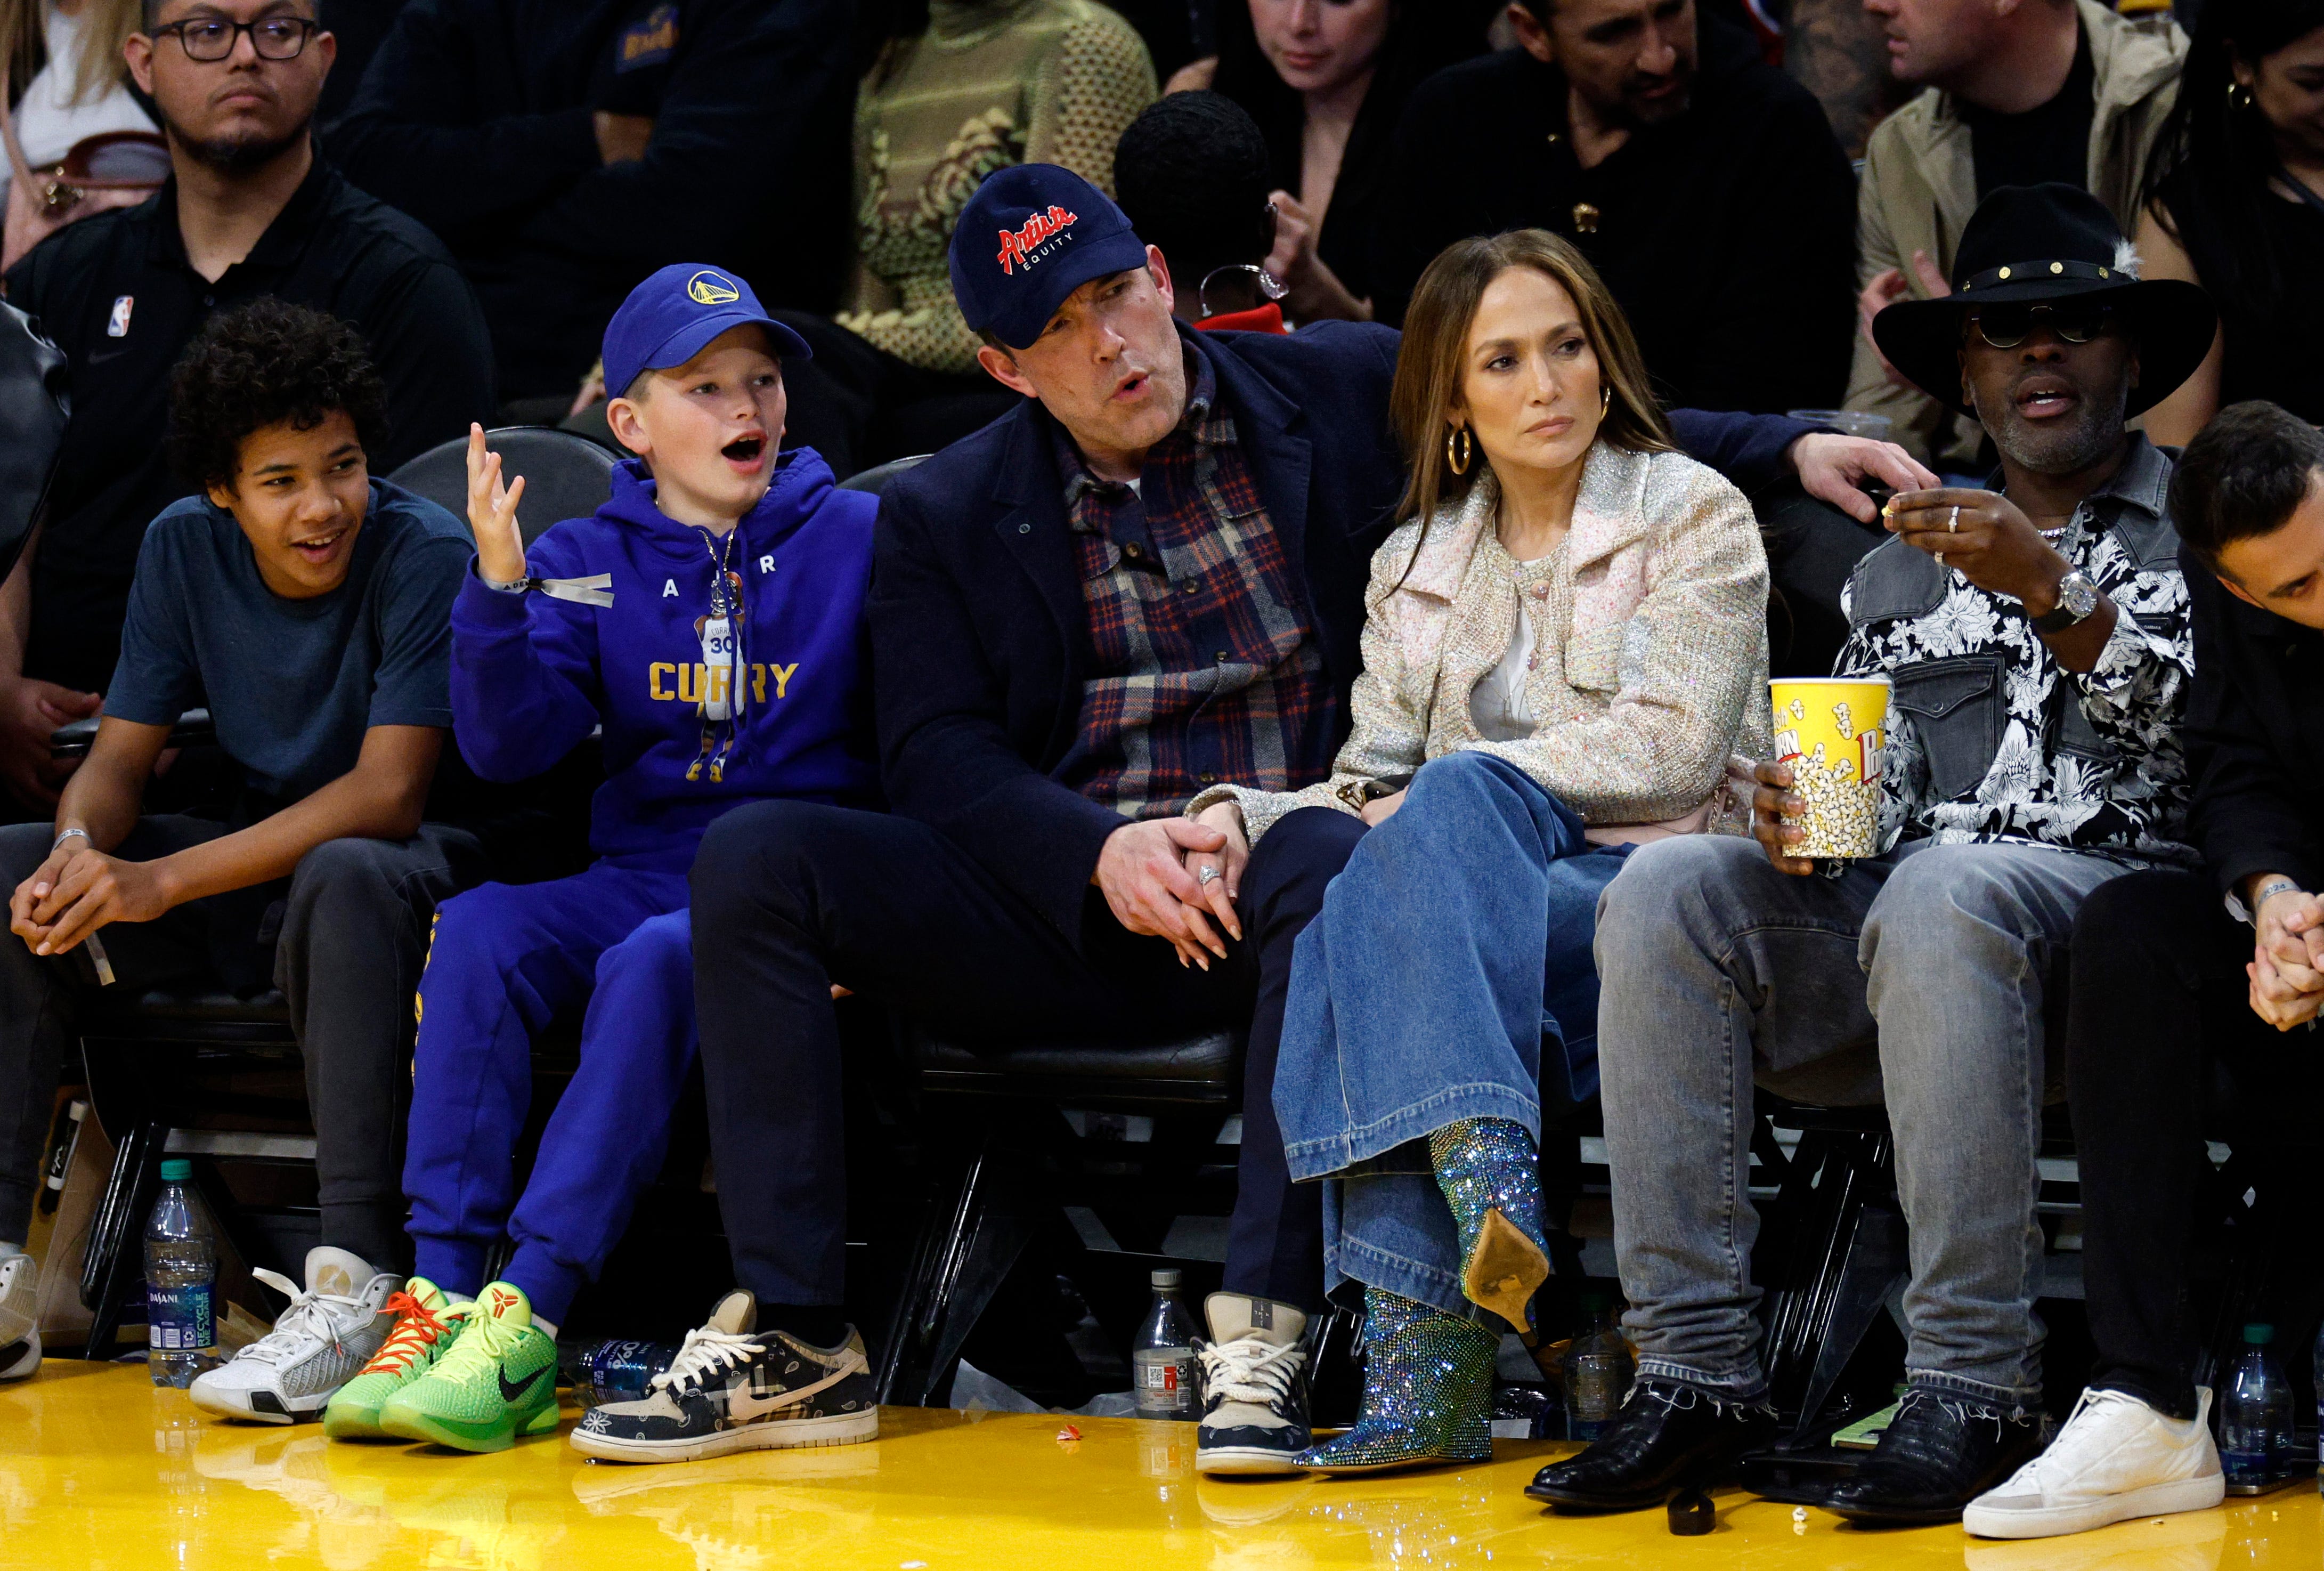 Jennifer Lopez Enjoys a Night Out With Ben Affleck and His Son at L.A. Lakers Game